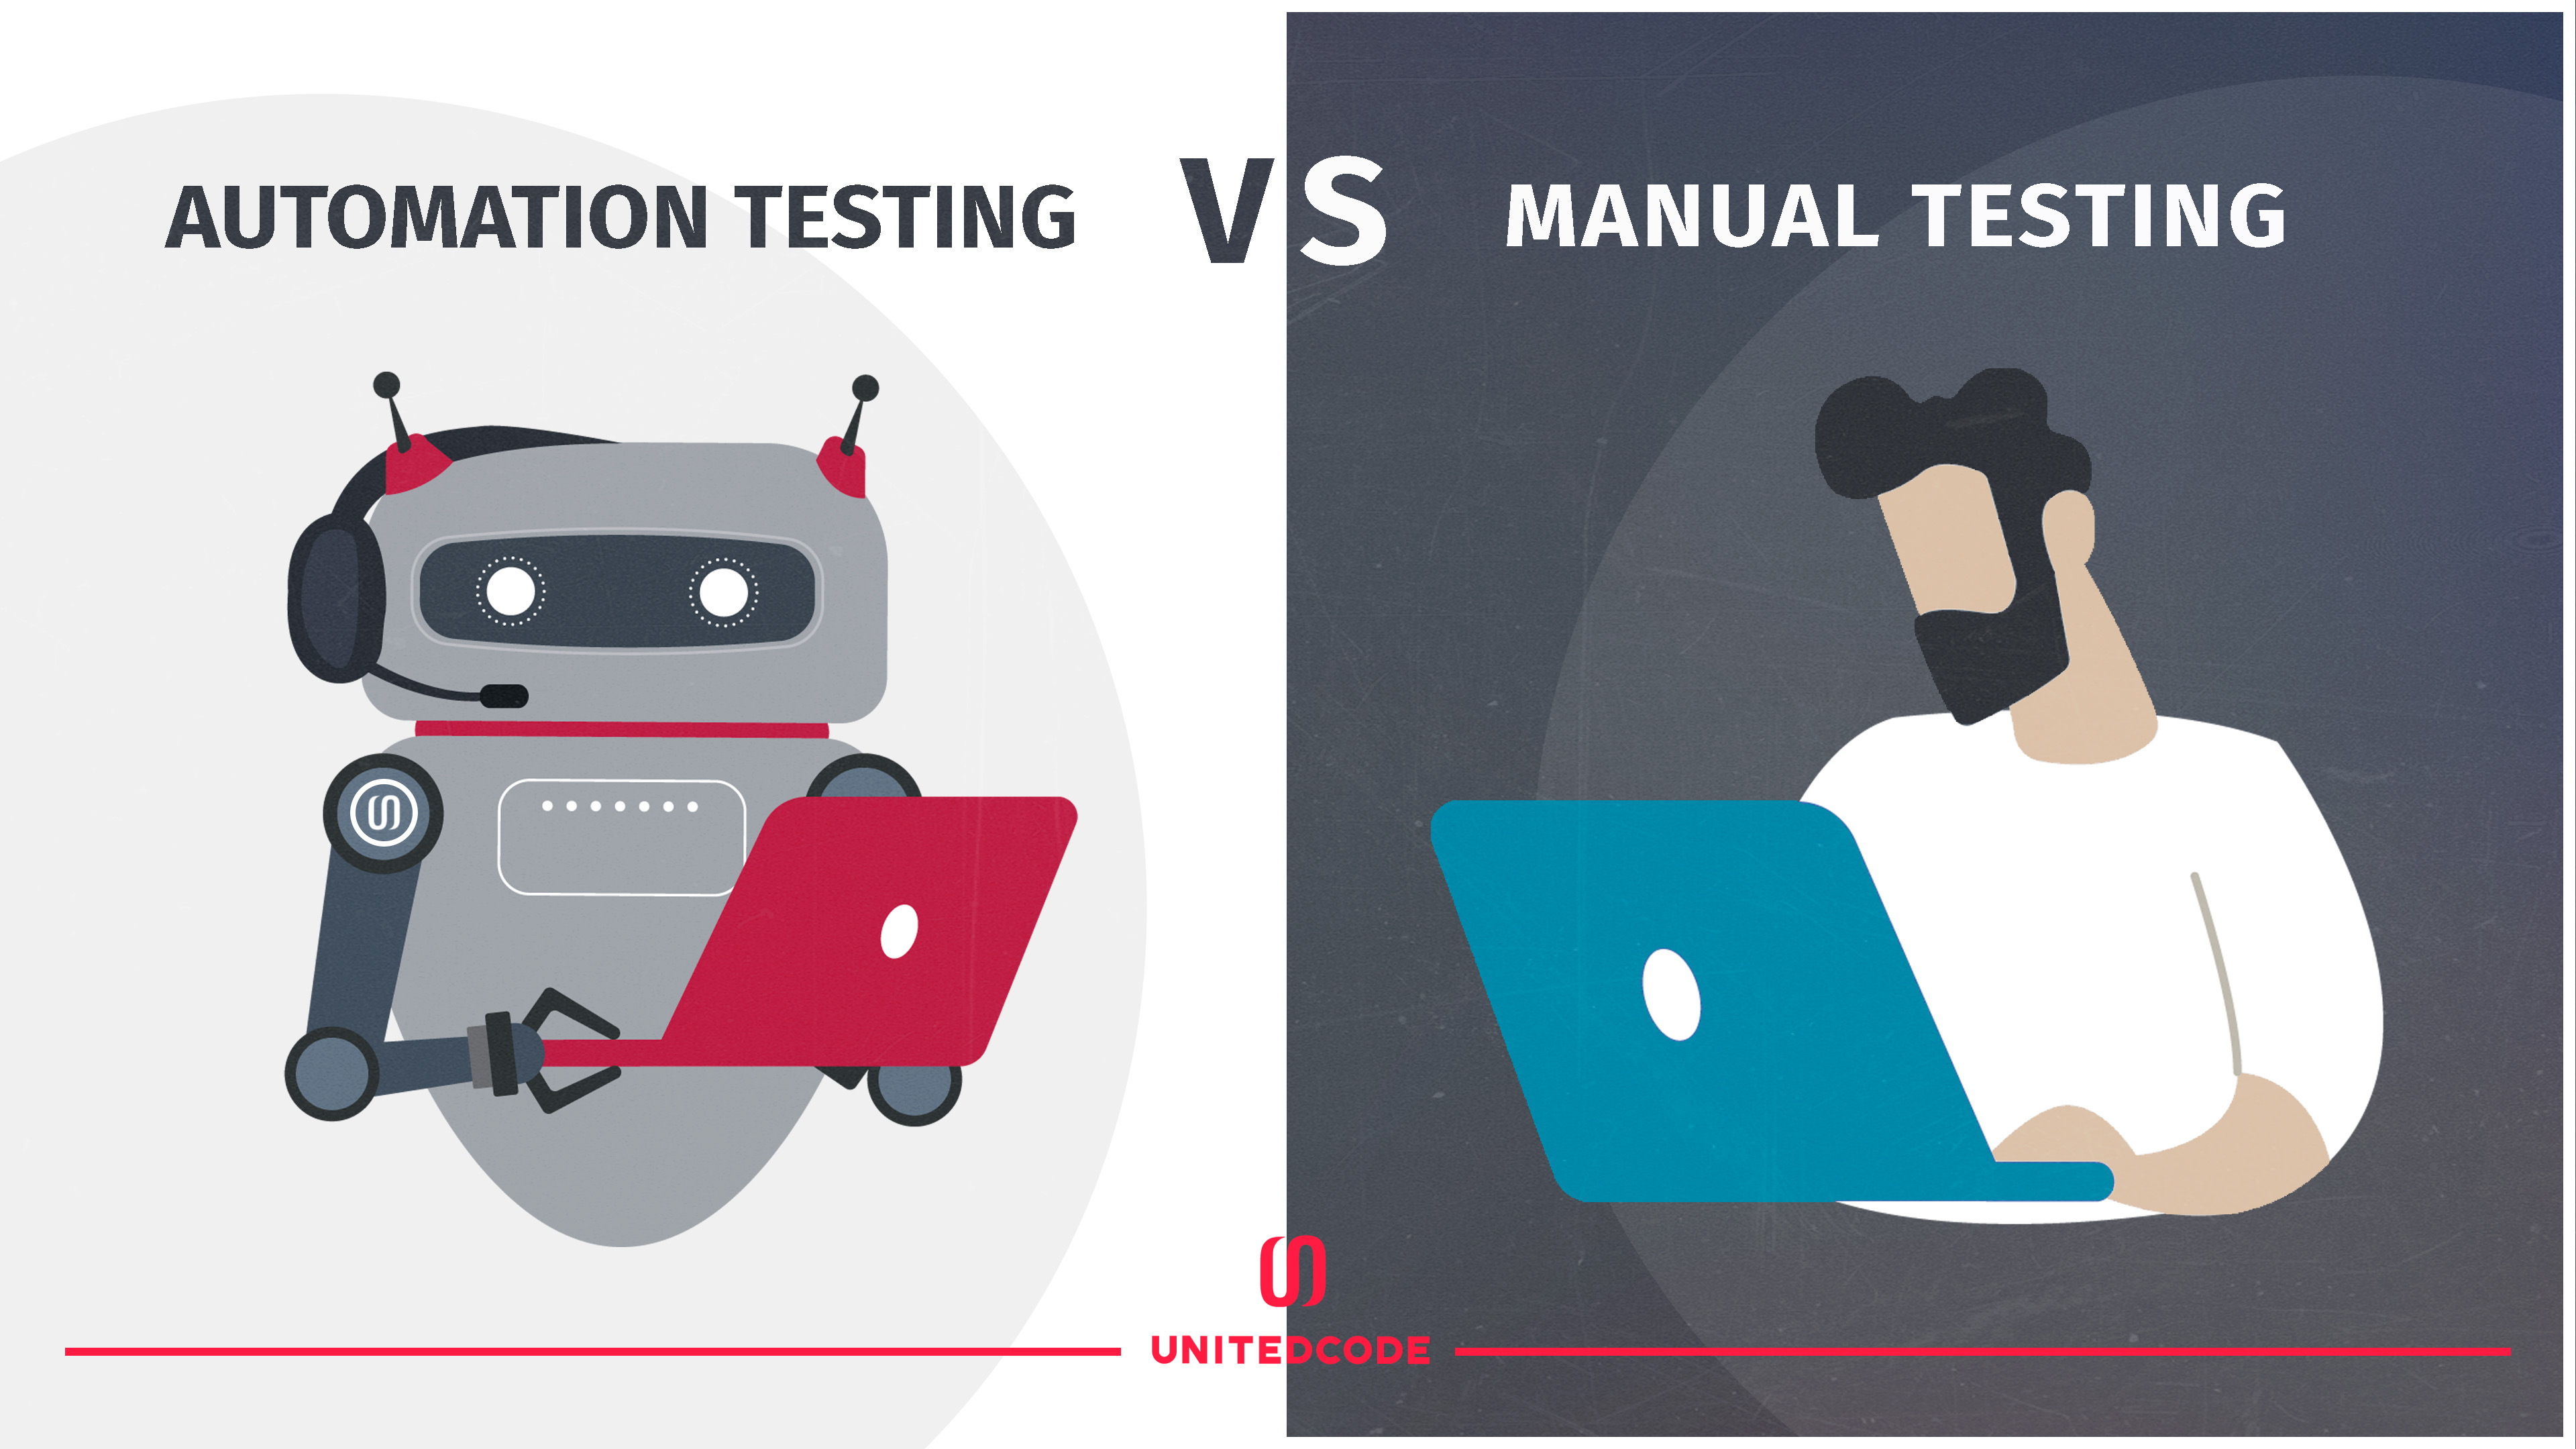 manual testing vs automation testing: what to choose?